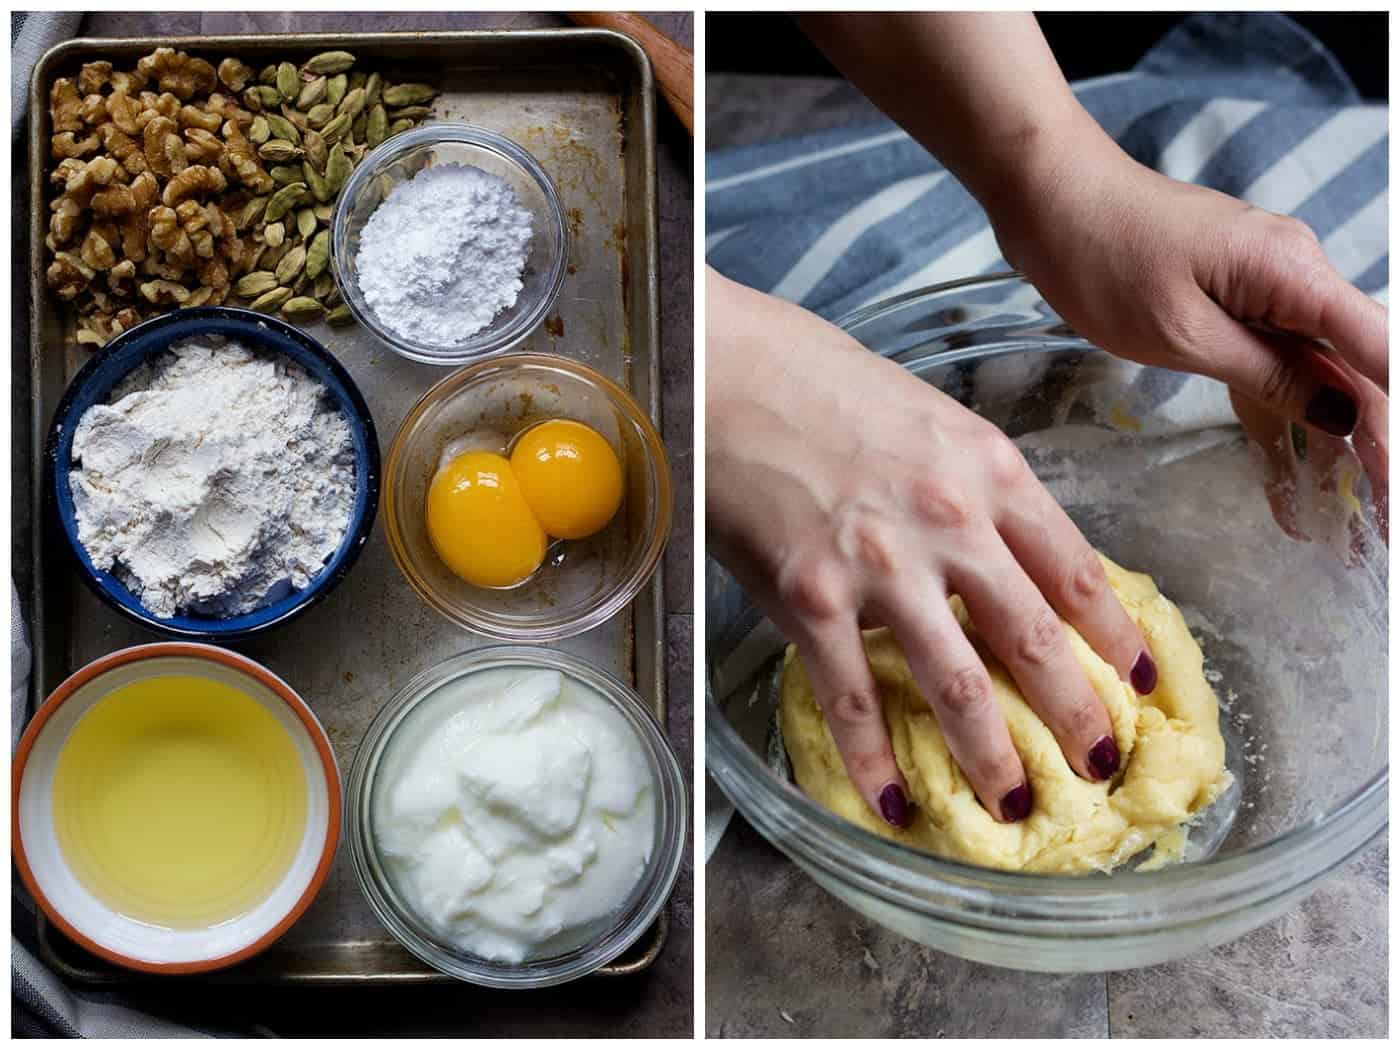 To make this Persian dessert you need walnuts, sugar, cardamom, flour, vegetable oil and egg yolk. Make the dough fist. 